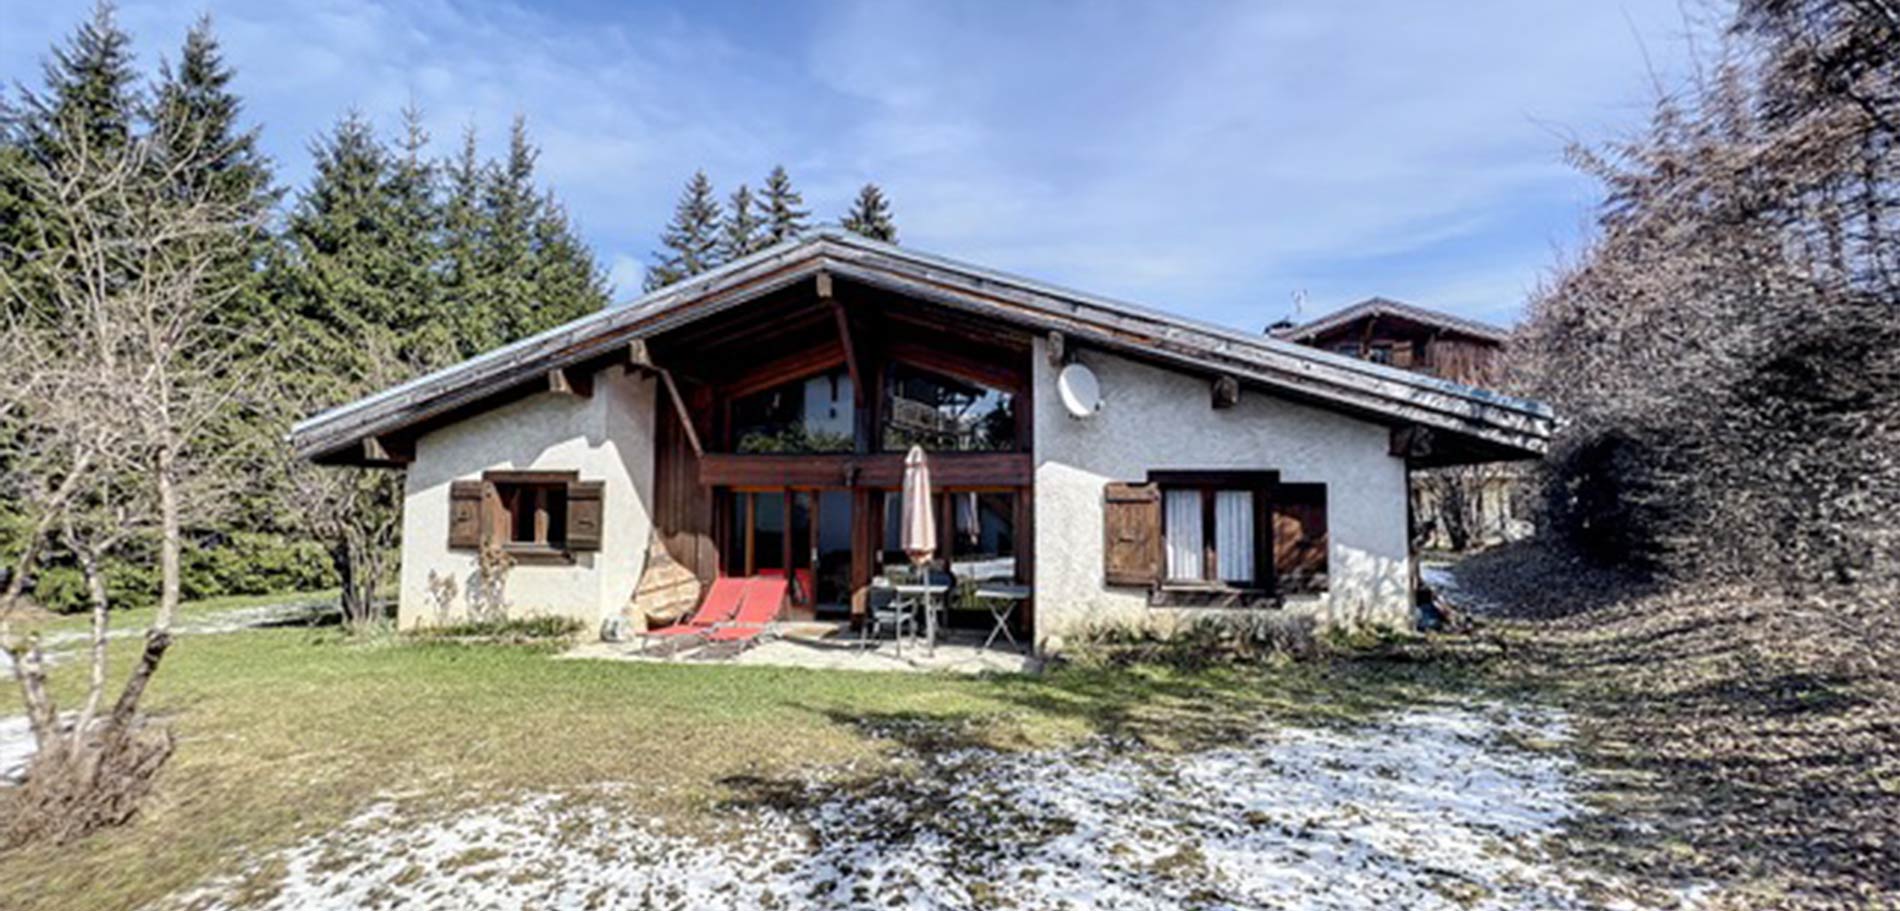 Chalet Nationale in Megeve